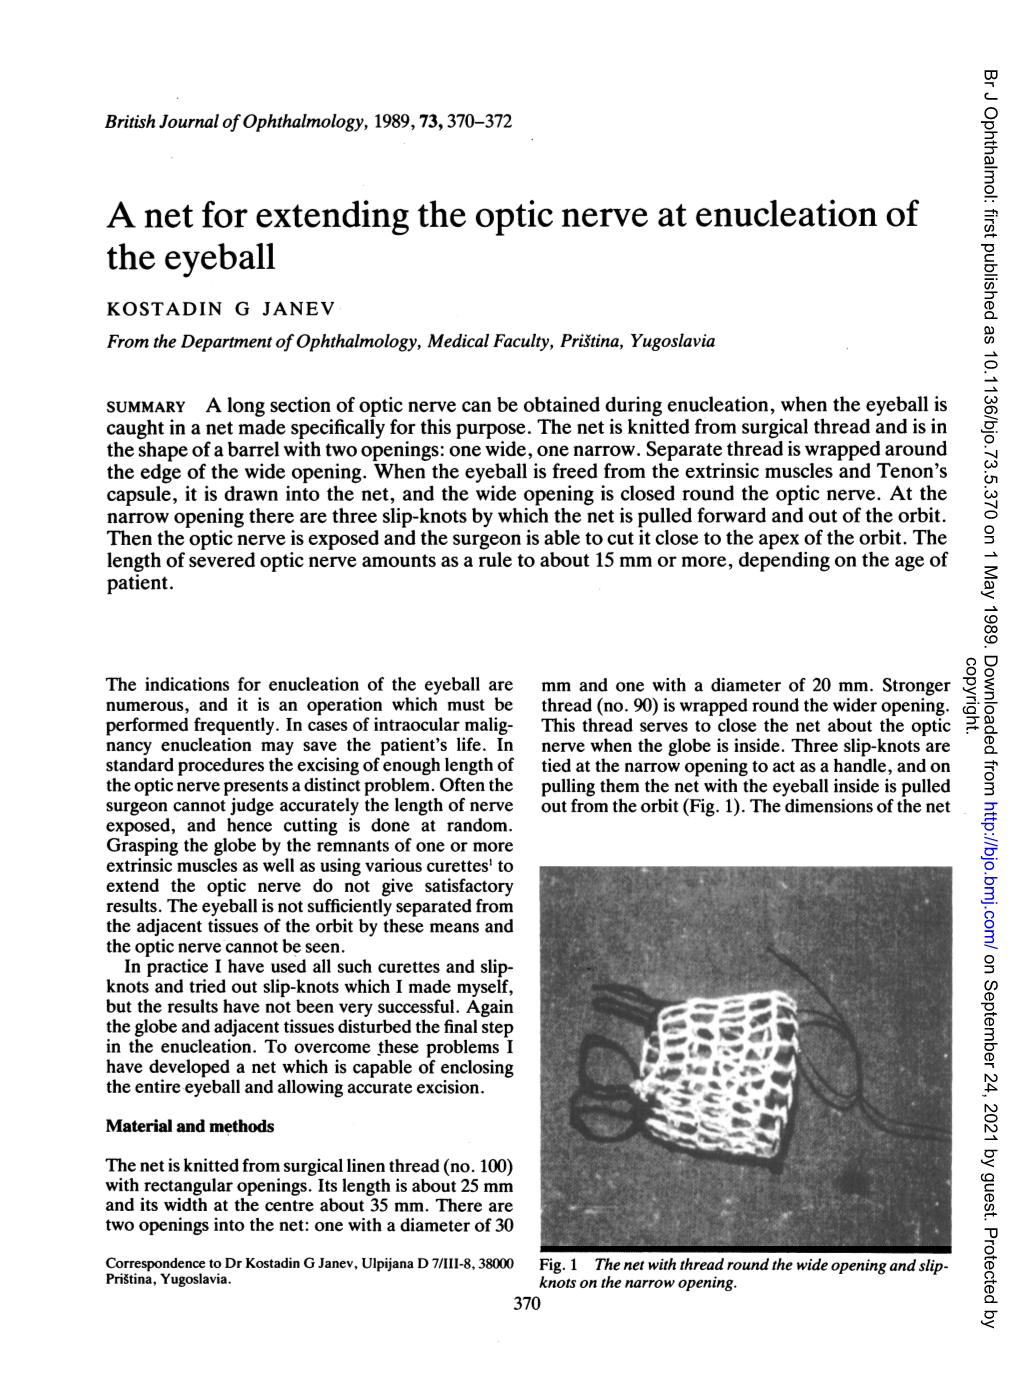 A Net for Extending the Optic Nerve at Enucleation of the Eyeball KOSTADIN G JANEV from the Department Ofophthalmology, Medical Faculty, Prigtina, Yugoslavia